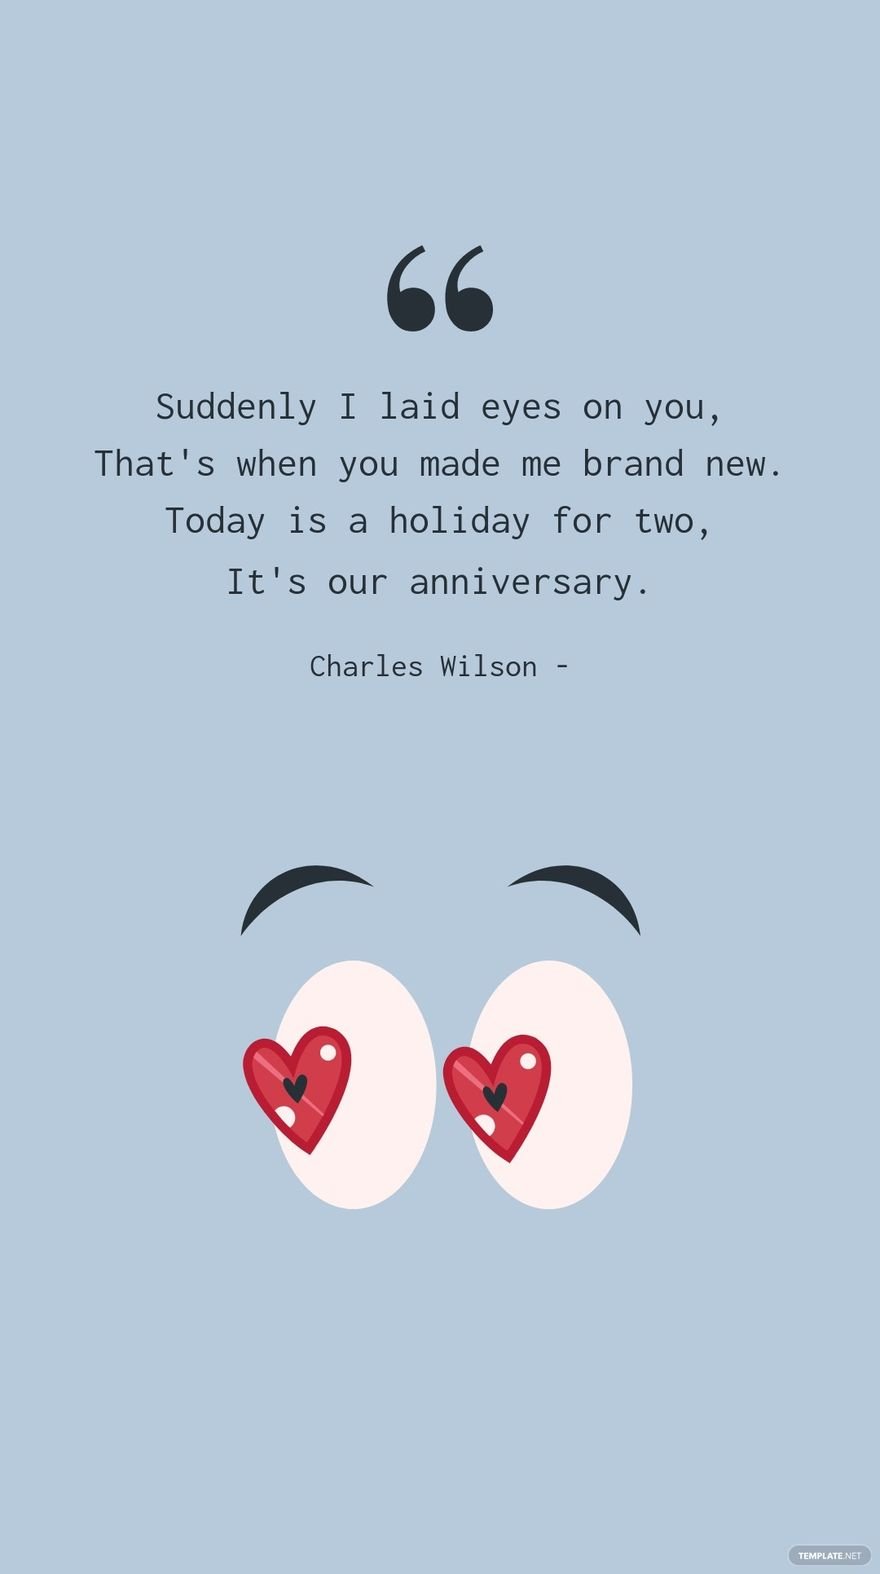 Charles Wilson - Suddenly I laid eyes on you, That's when you made me brand new. Today is a holiday for two, It's our anniversary. in JPG